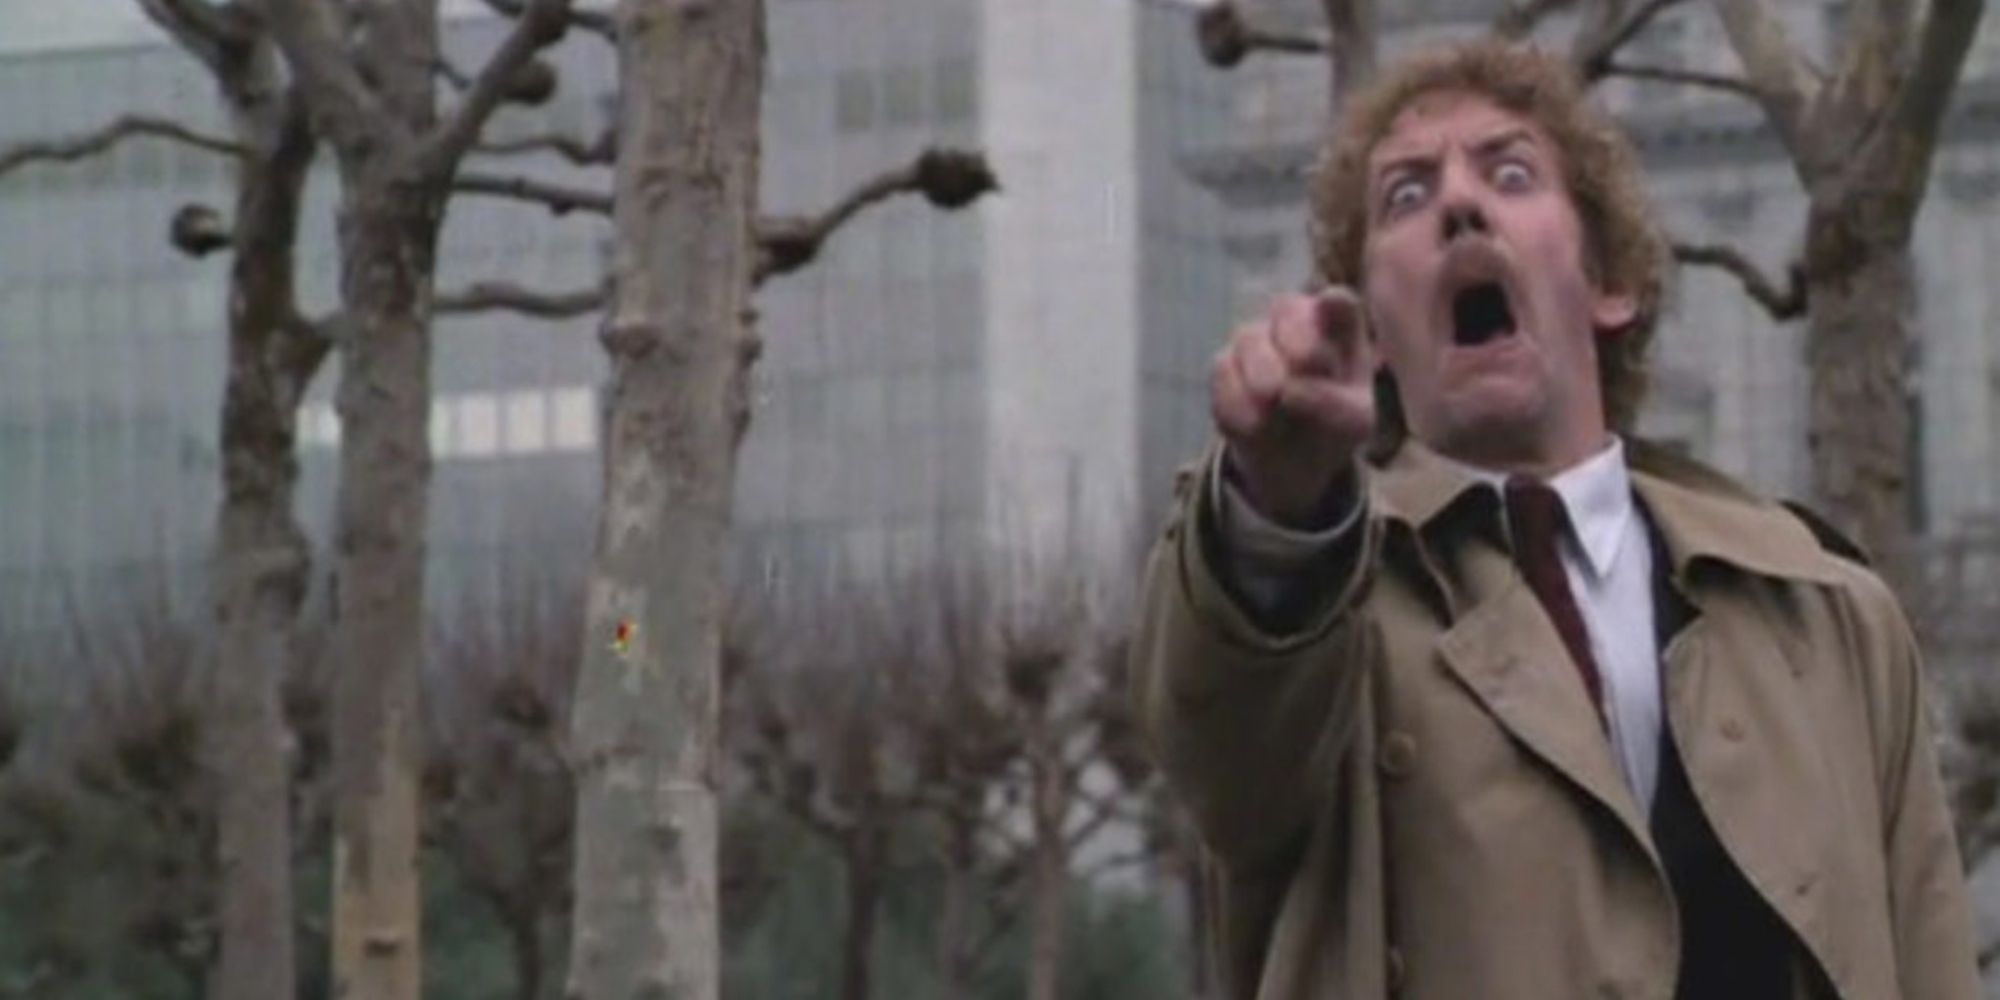 Invasion of the Body Snatchers ends on one of the all-time creepiest screams